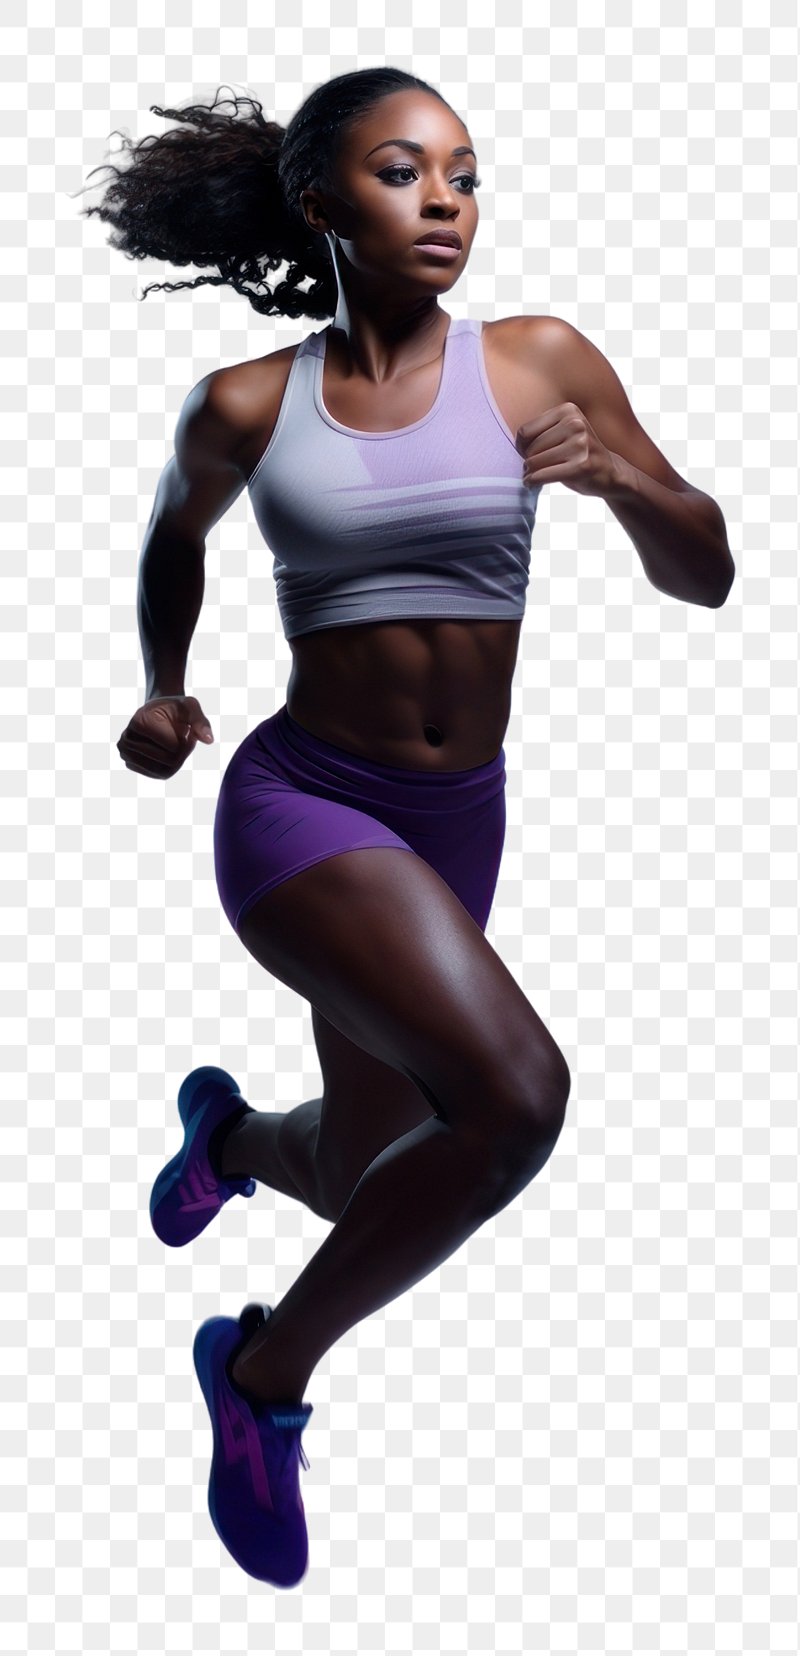 Fit female in white fitness attire jogging outdoors. Full length of a young  woman sprinting stock photo